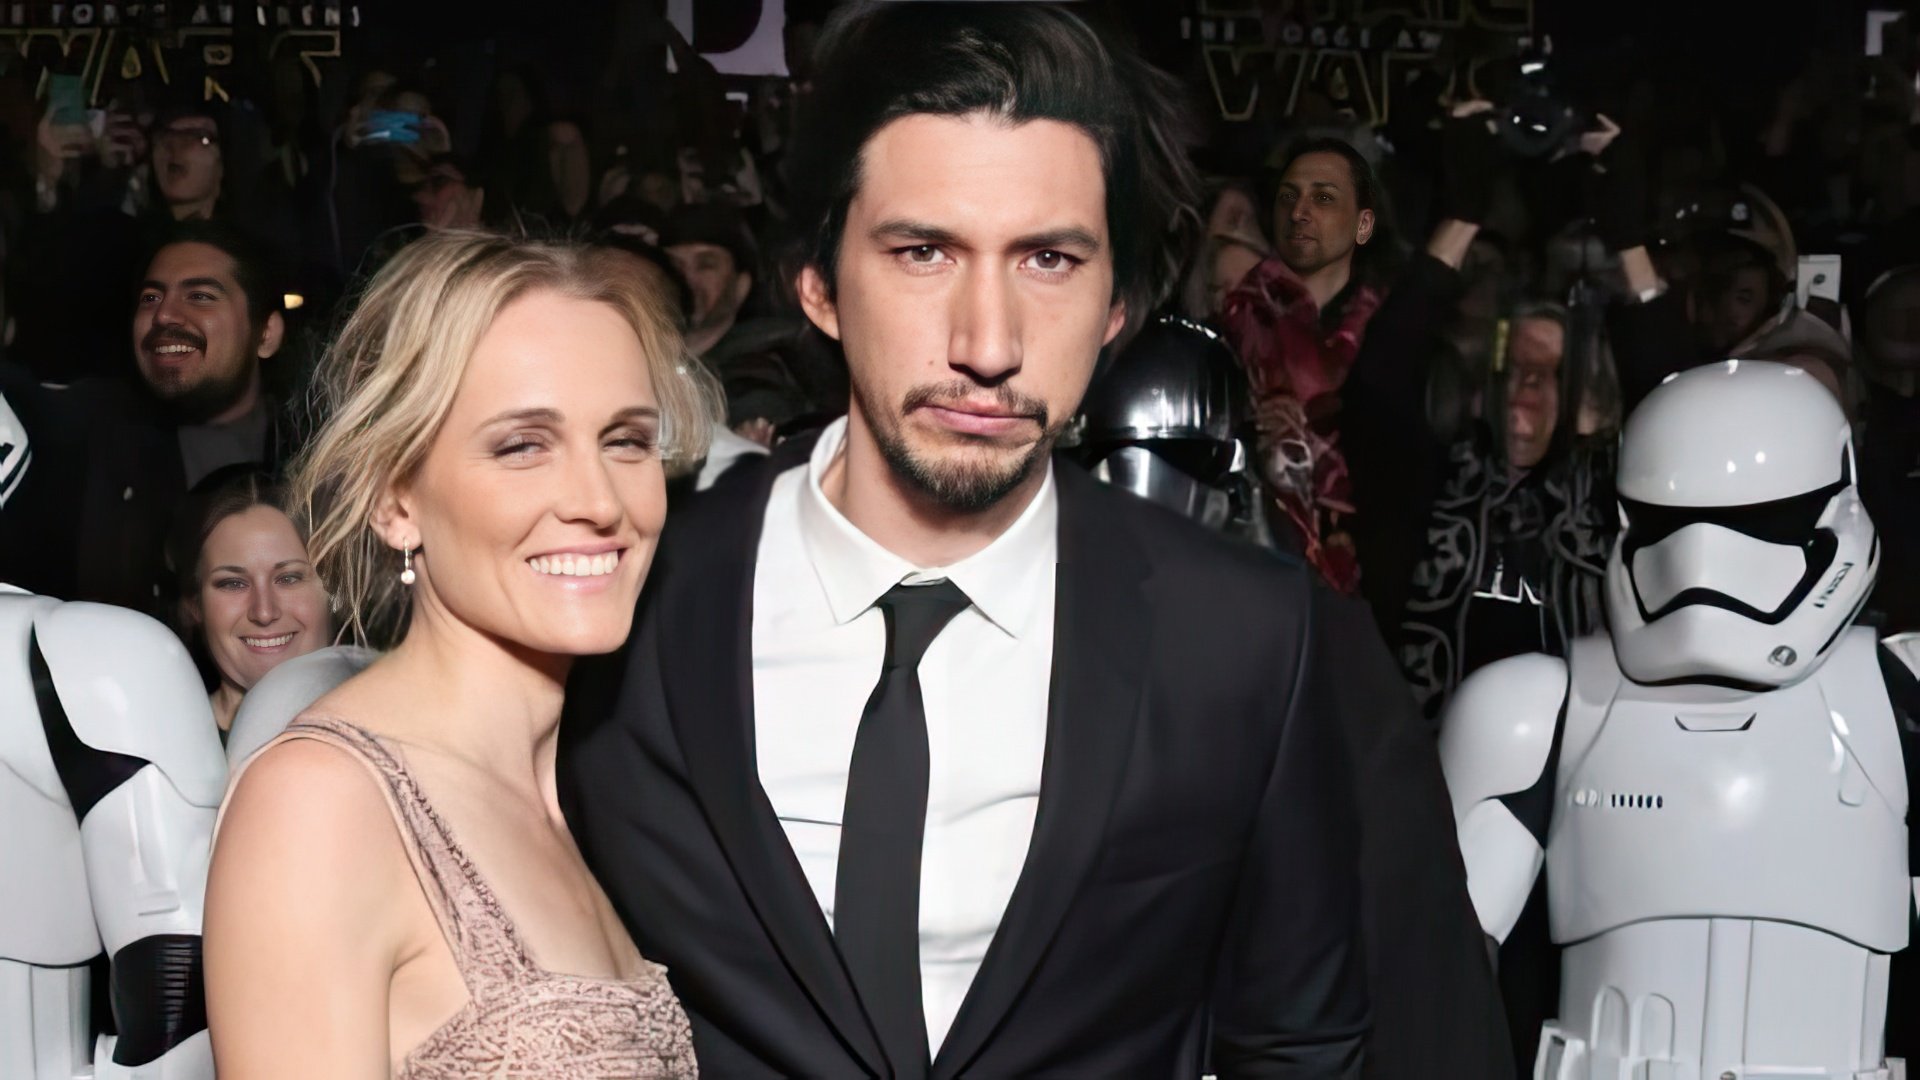 Adam Driver and his wife Joan at the premiere of Star Wars